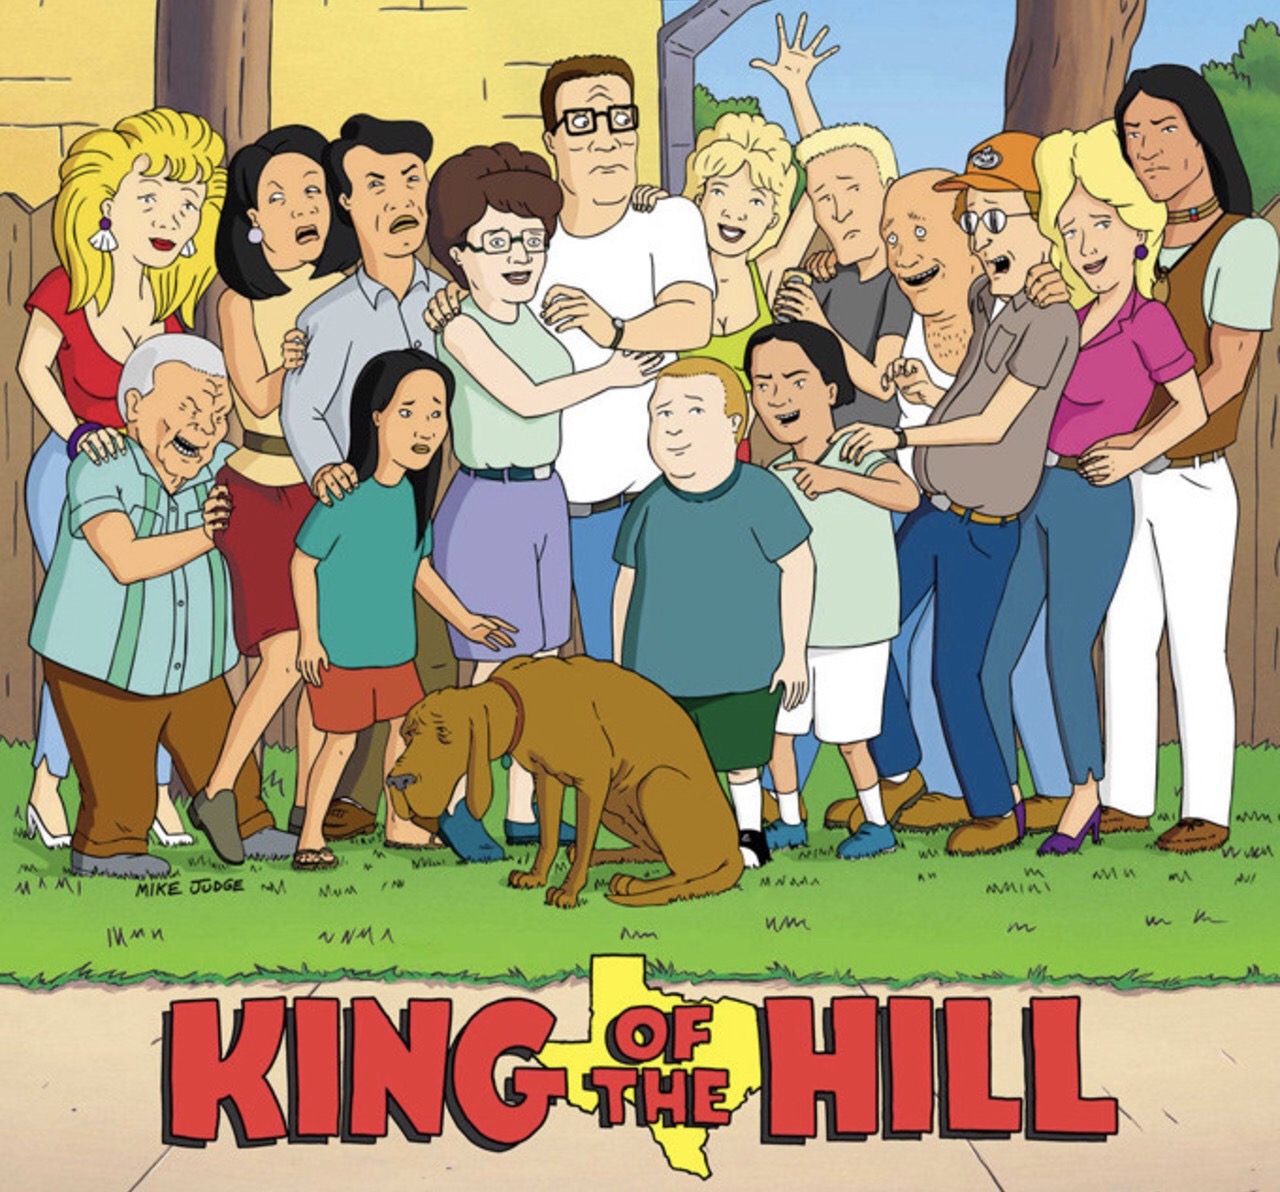 King Of The Hill Gamemode, Wiki